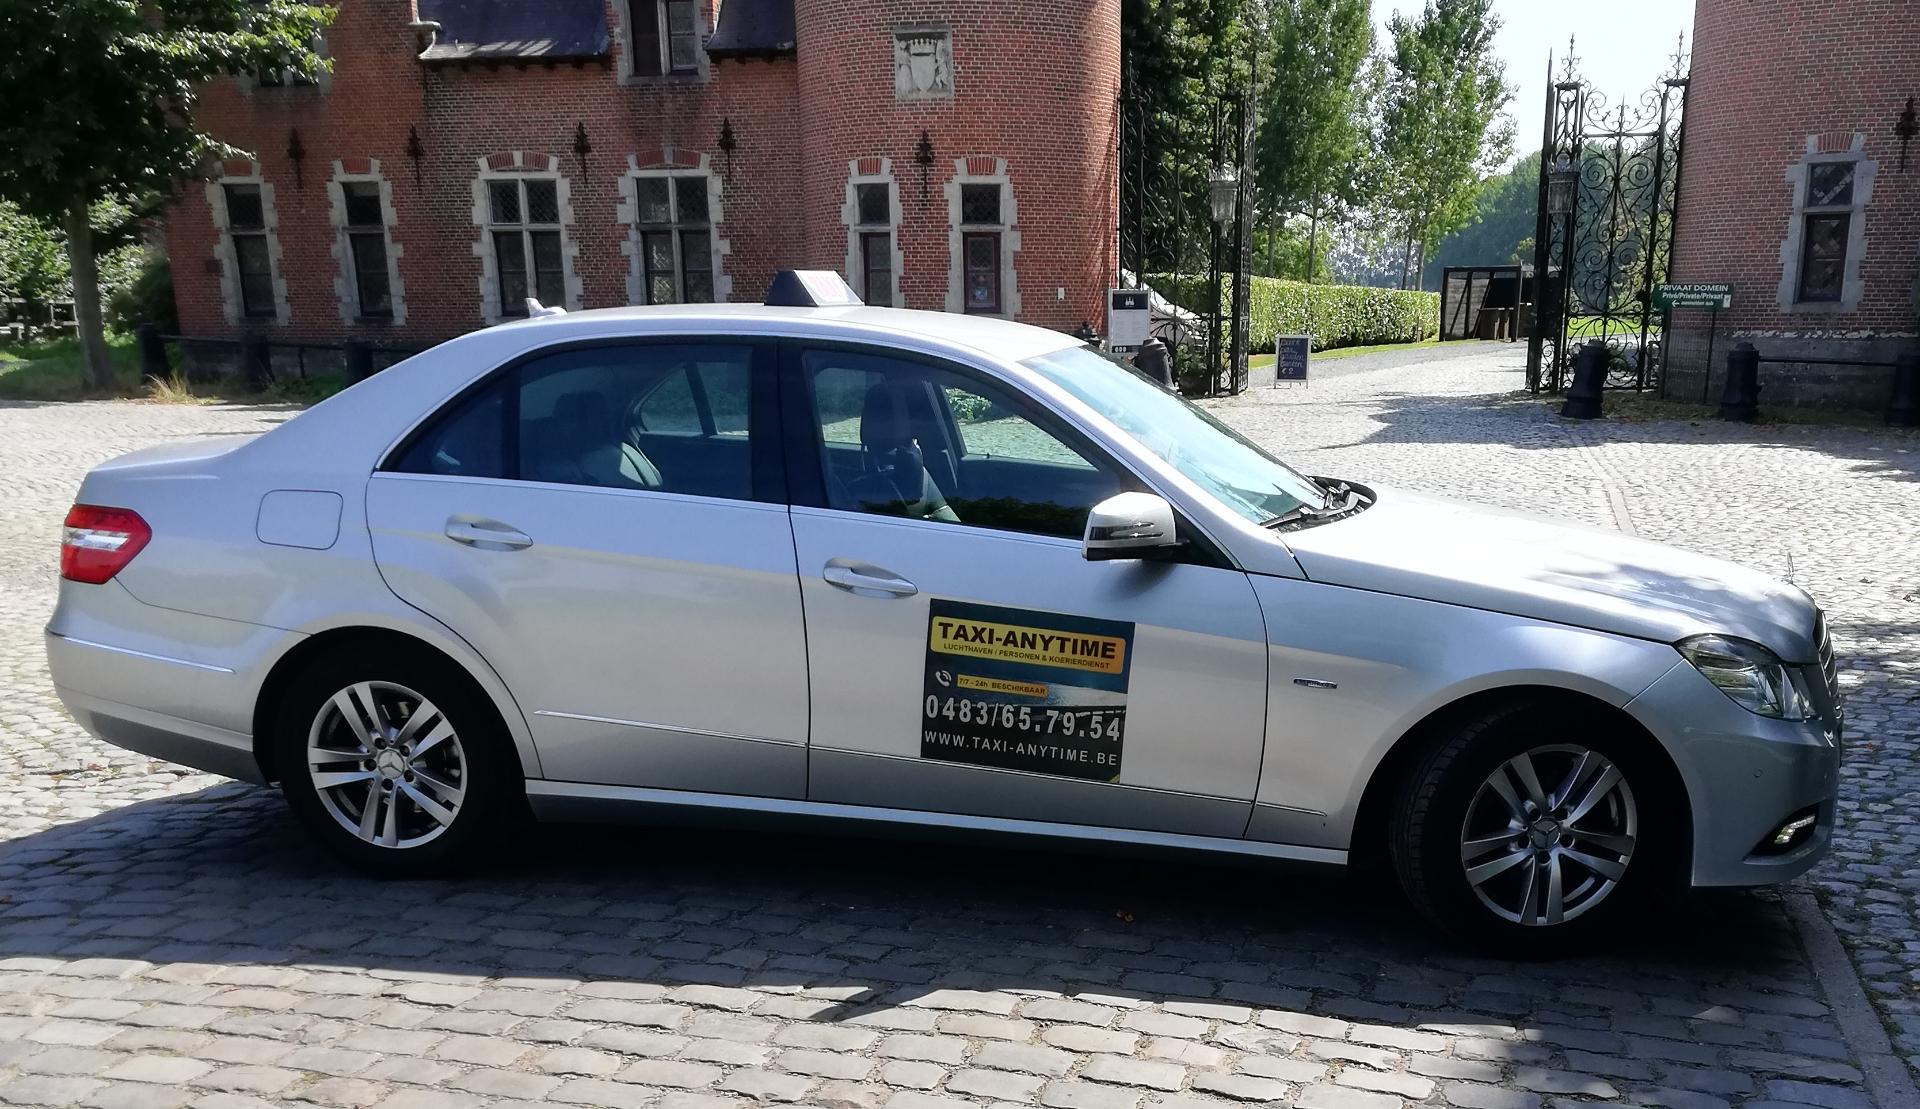 luxe-autoverhuurders Elsene Taxi-Anytime